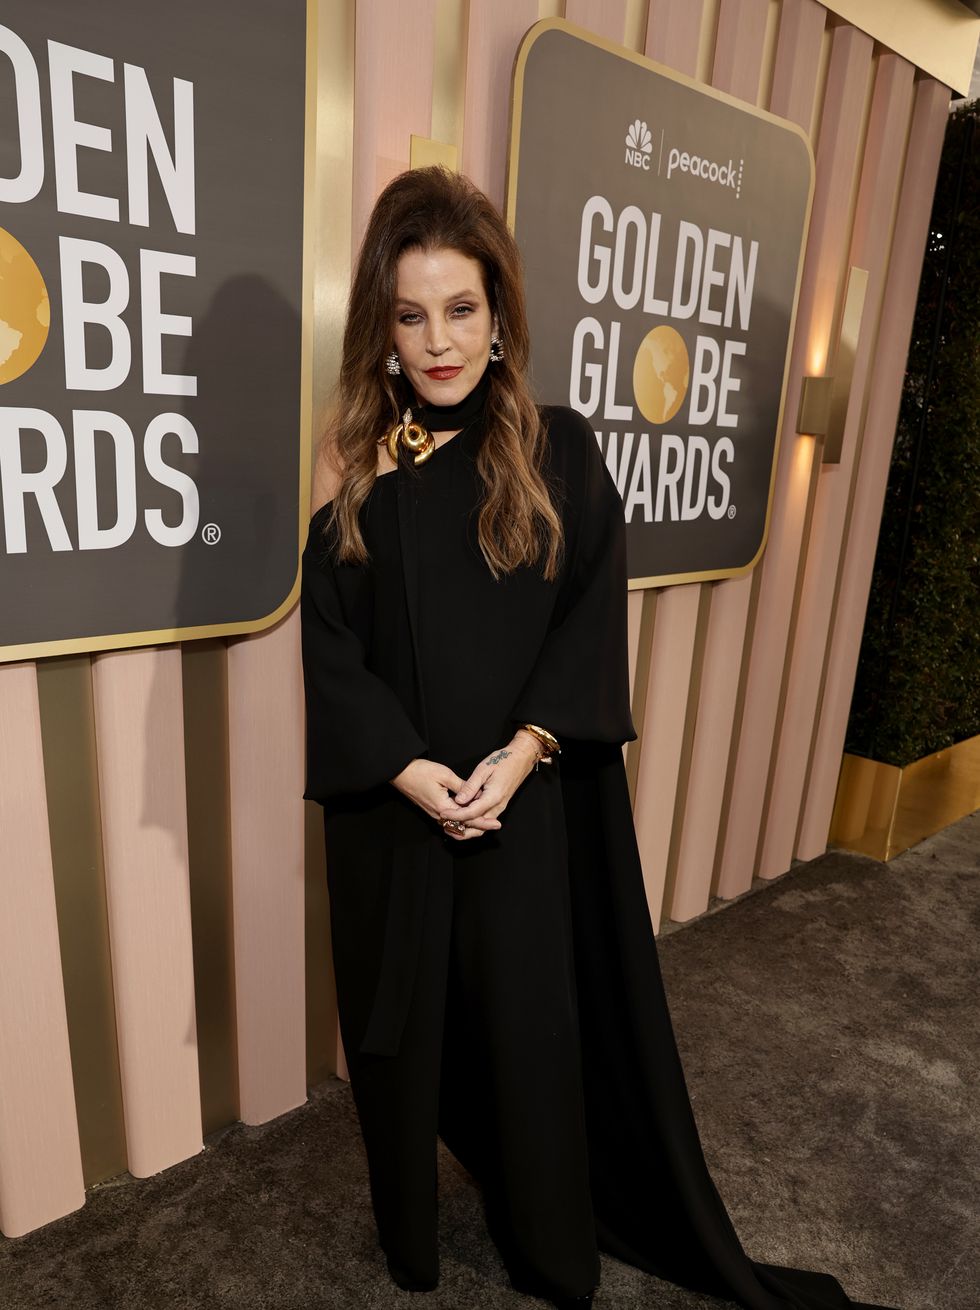 lisa marie presley posing for a photo at the golden globes red carpet